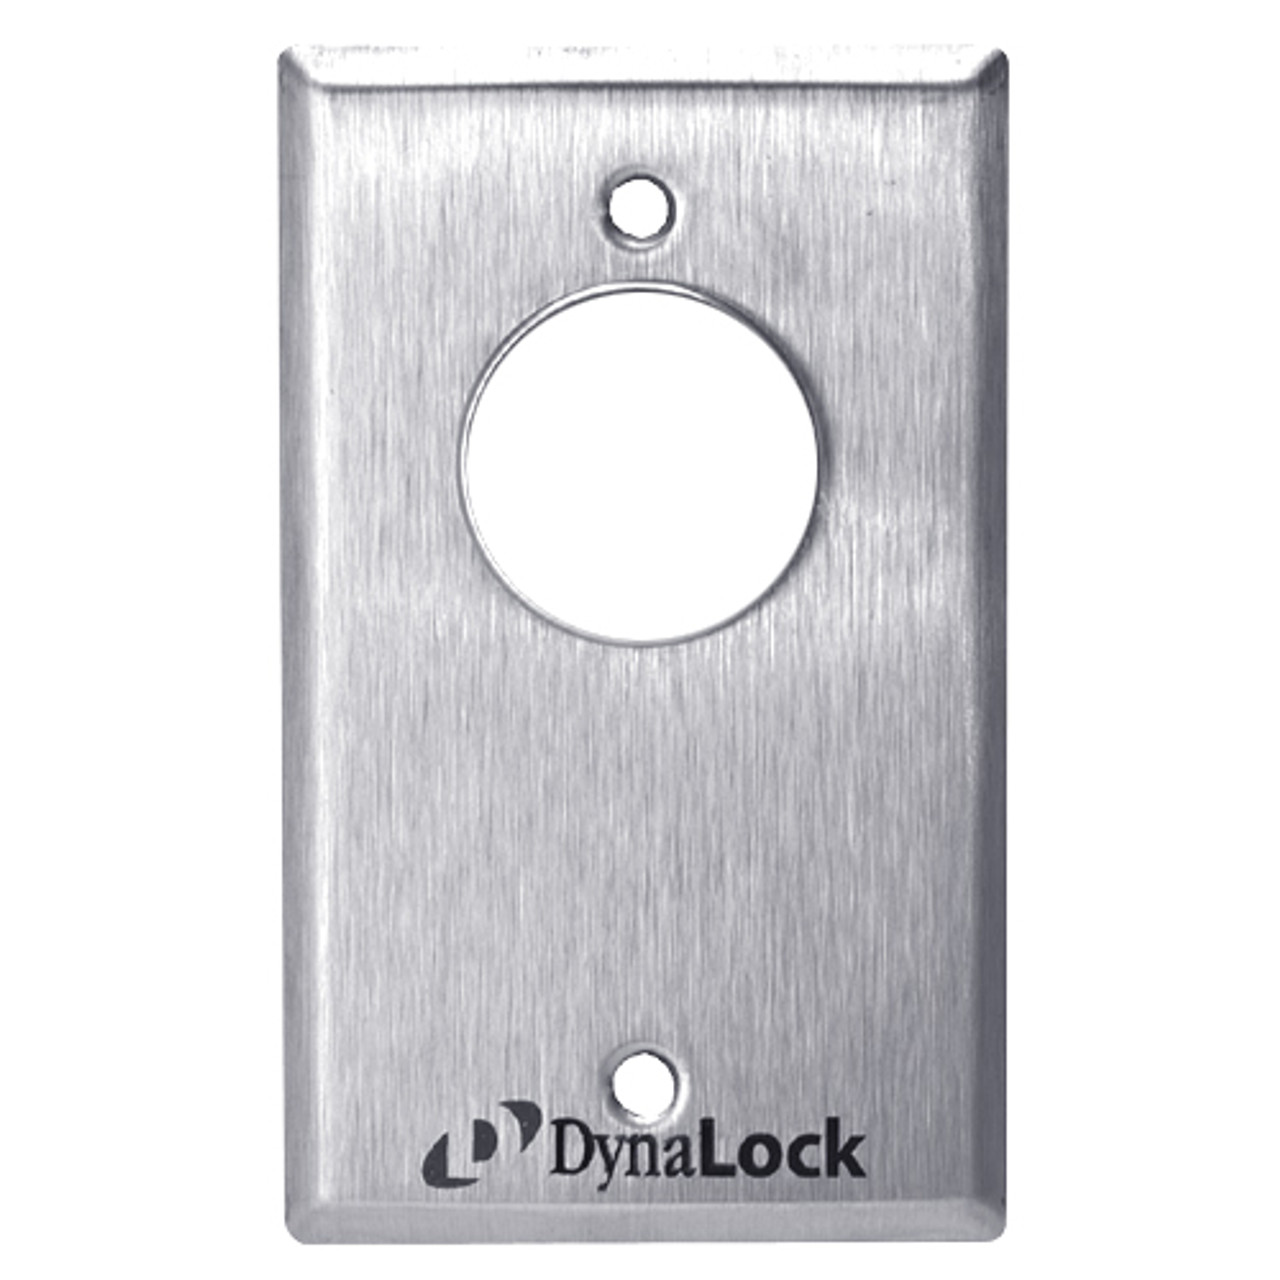 7022-US26 DynaLock 7000 Series Keyswitches Momentary 1 Double Pole Double Throw in Bright Chrome